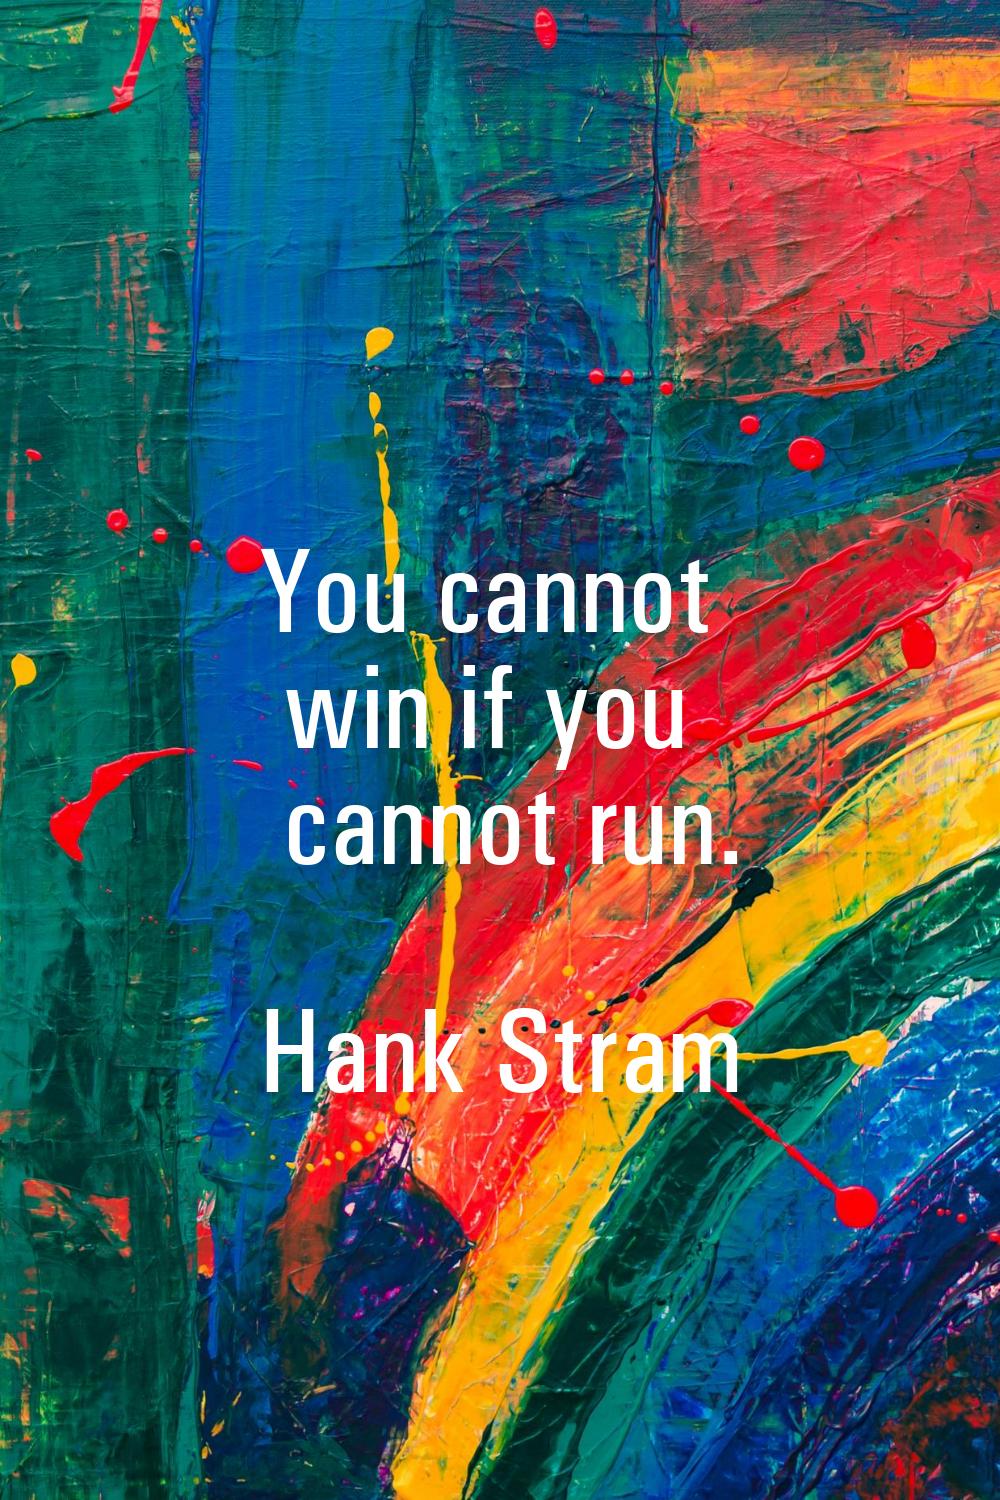 You cannot win if you cannot run.